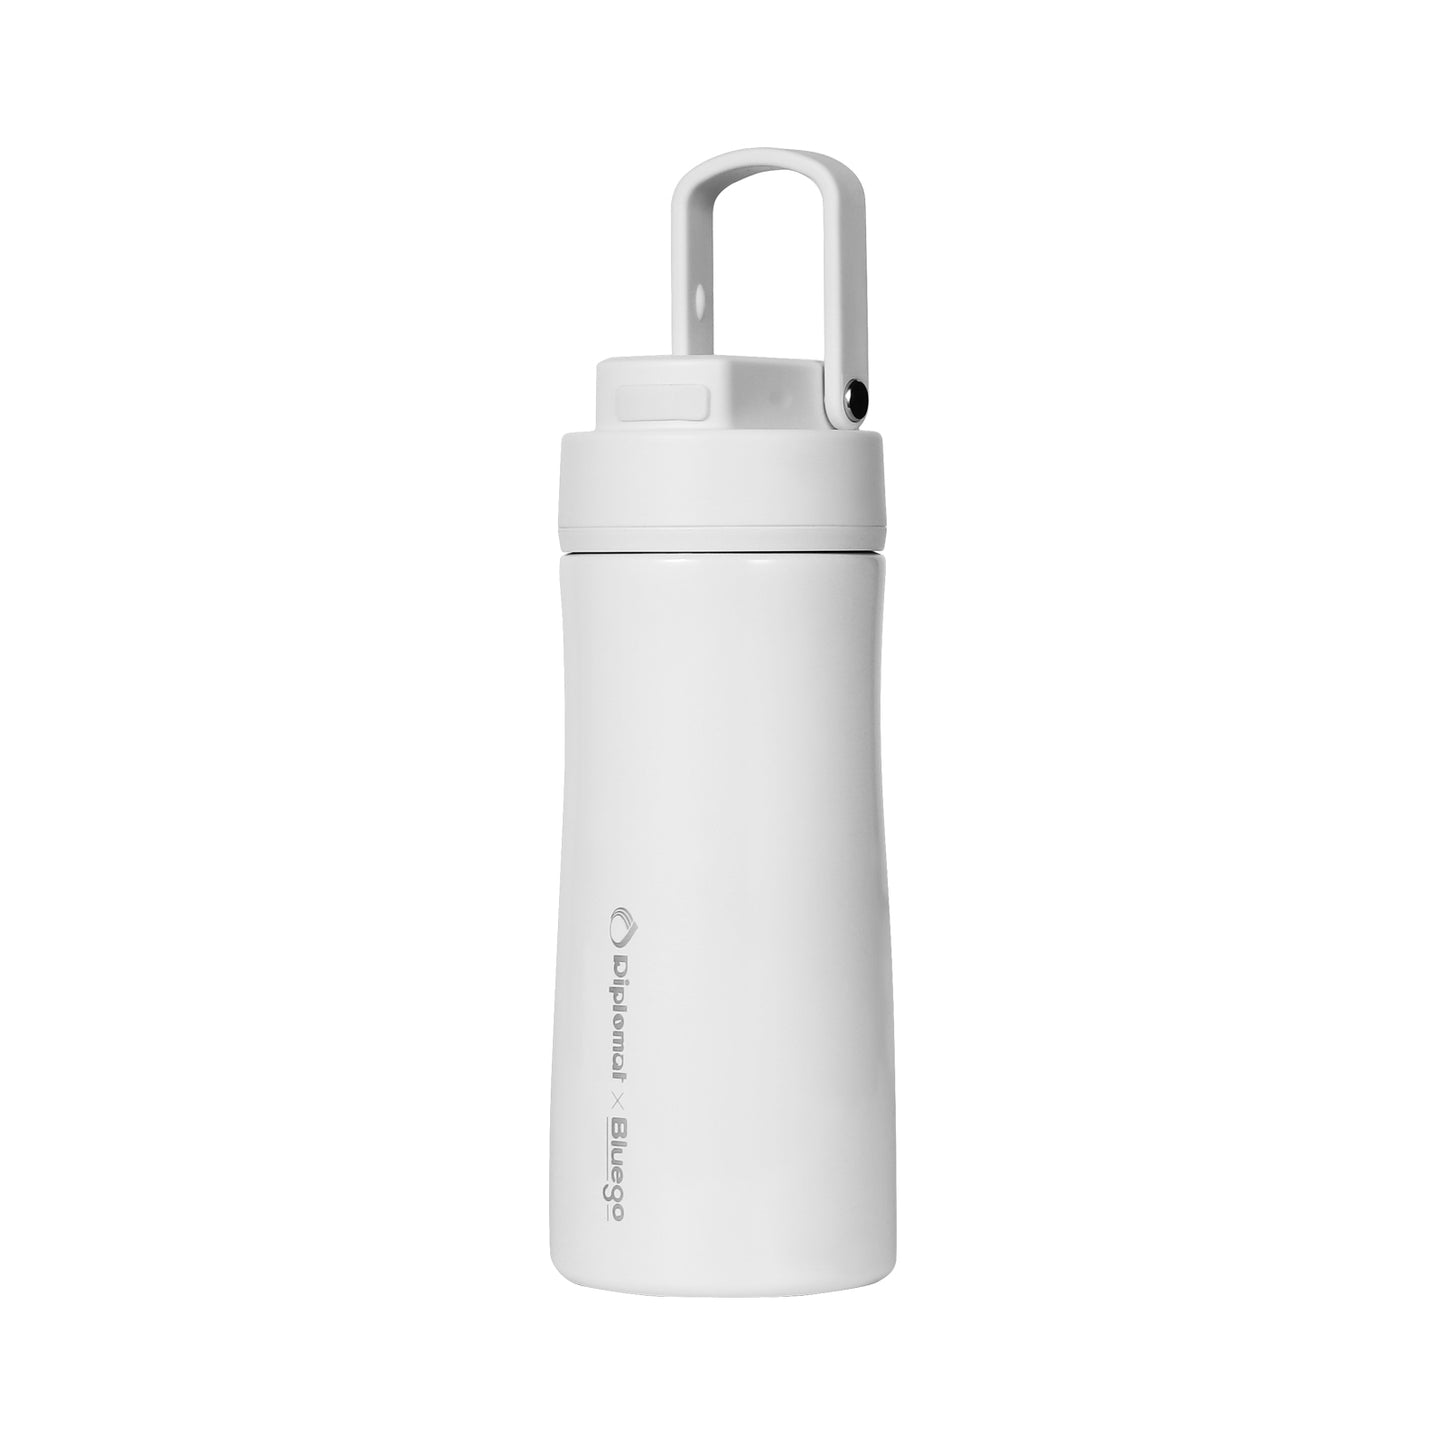 💧 Water Bottles, Self-Cleaning and Insulated Stainless Steel Water Bottle with UV Water Purifier, with Handle.